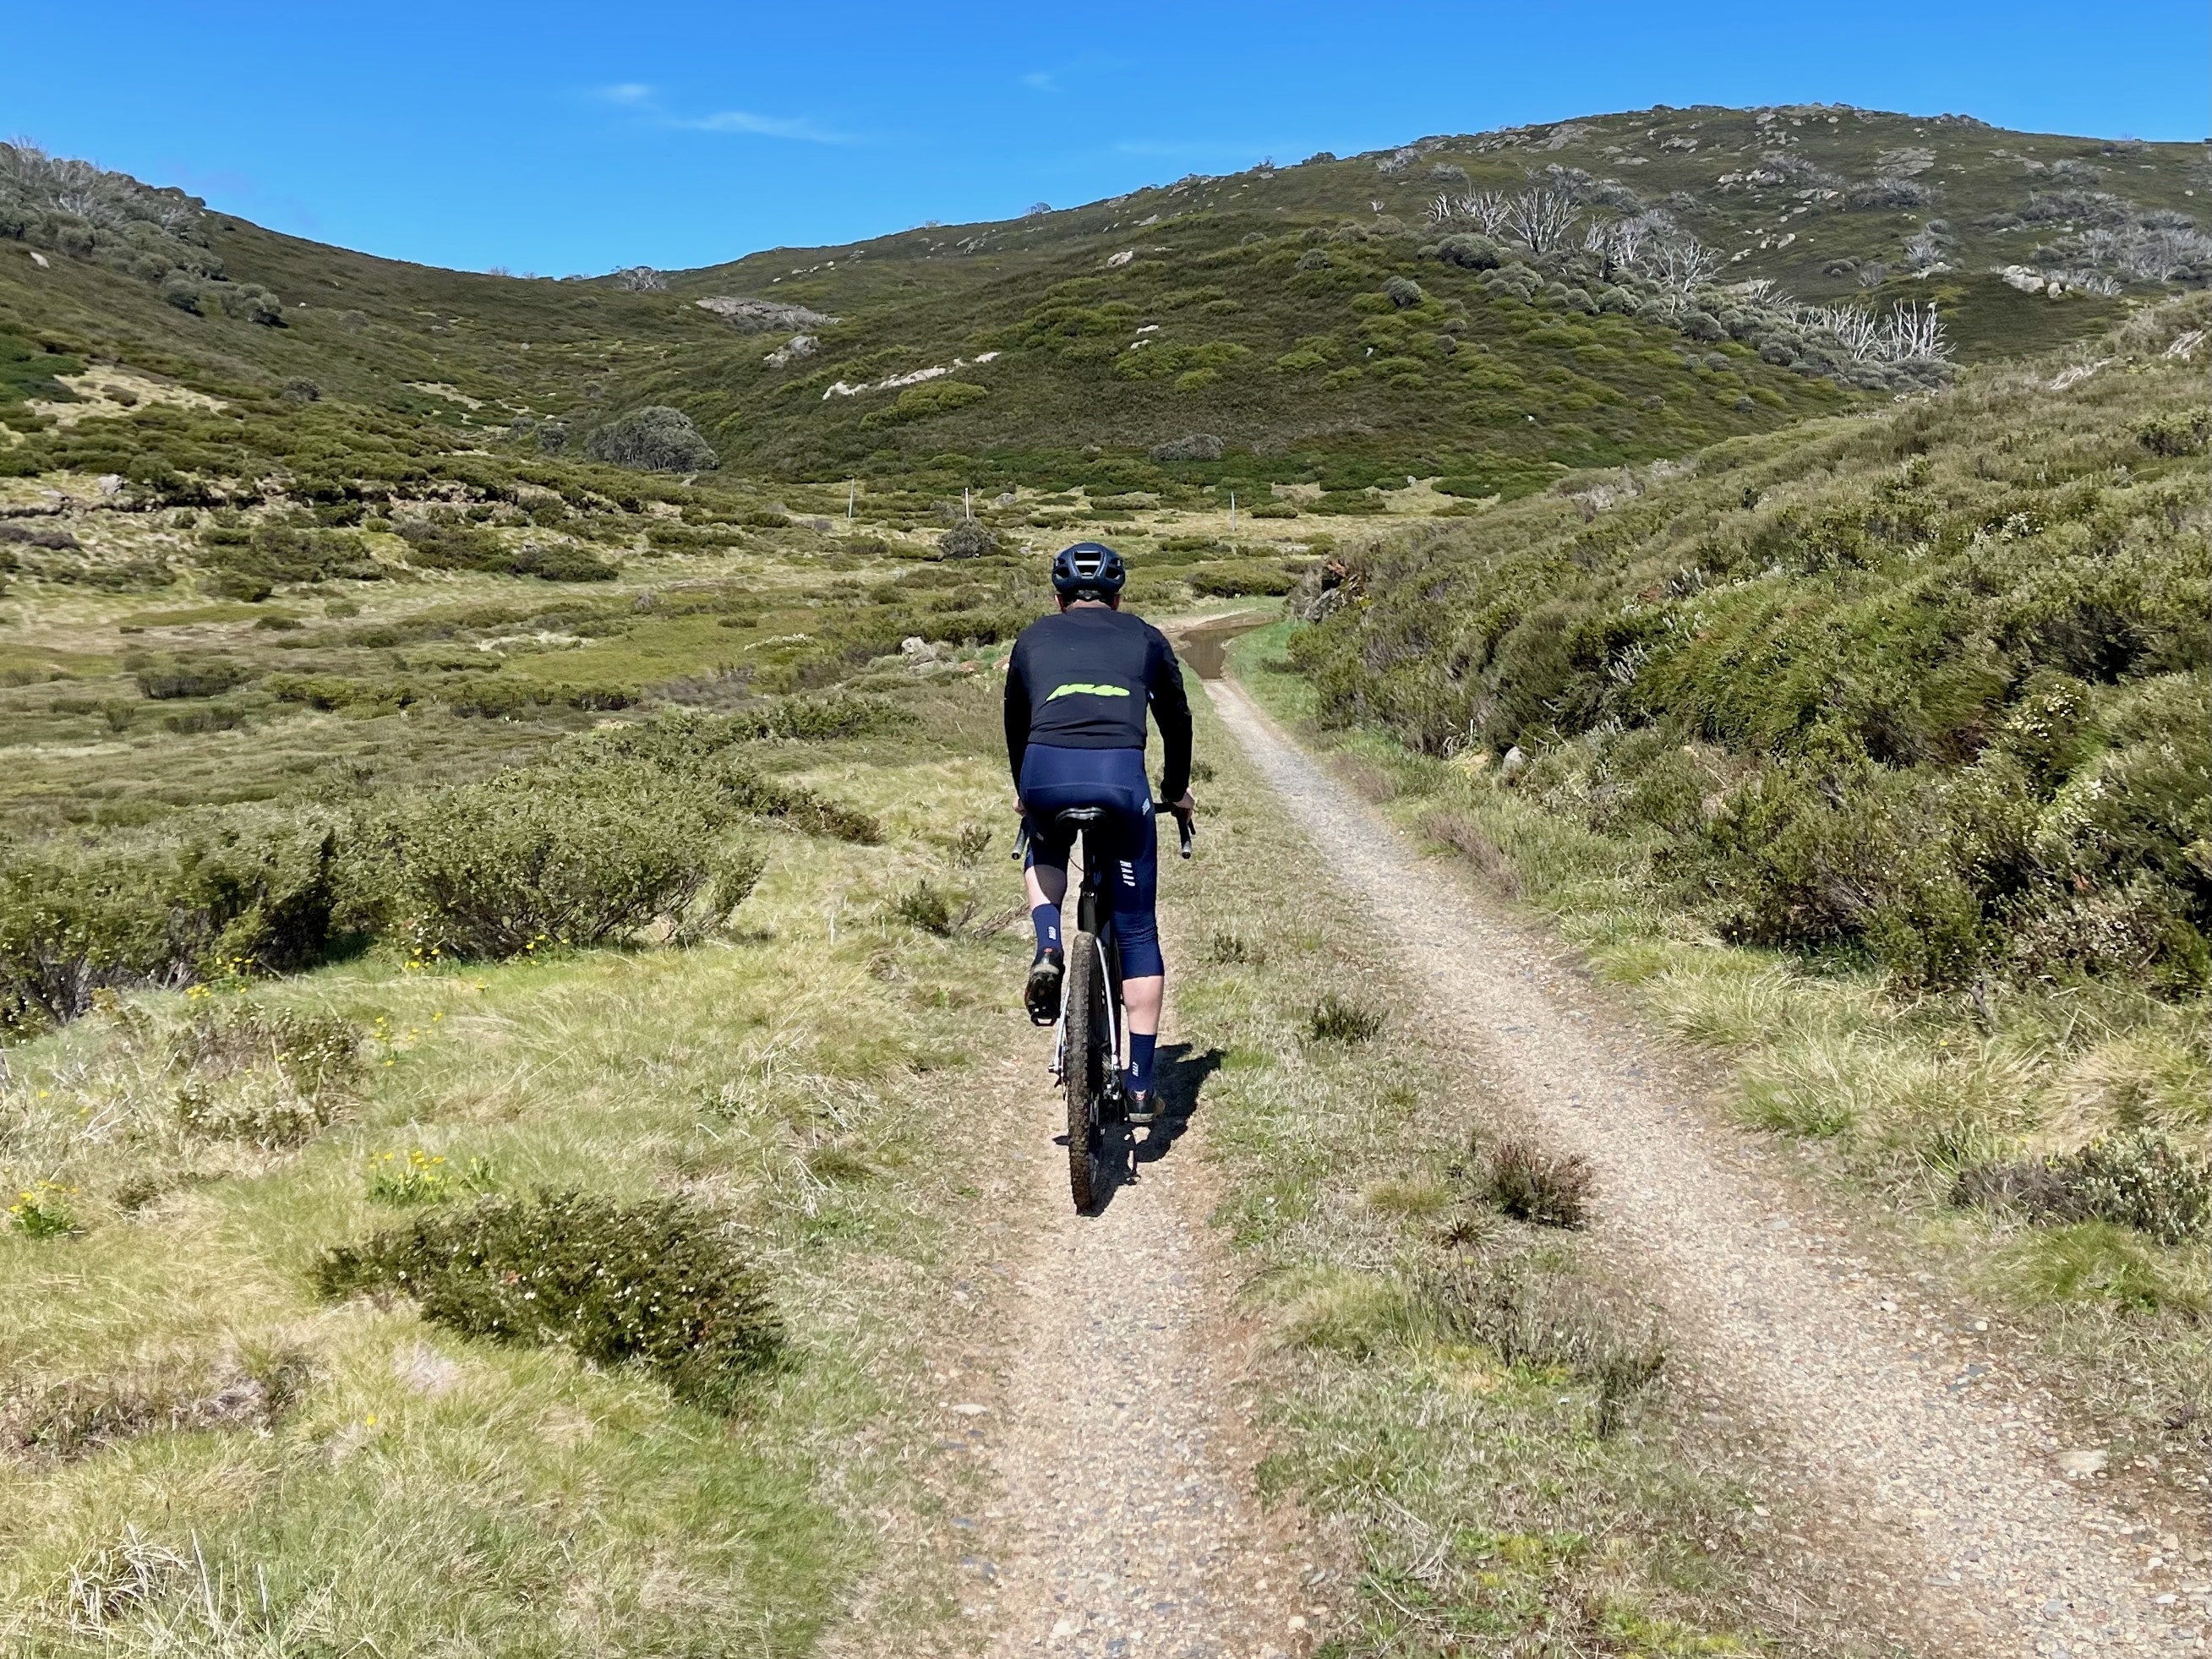 Cyclist riding on a smooth gravel double track at the base of surrounding hills and surrounded by lush green tussock grass on a sunny day